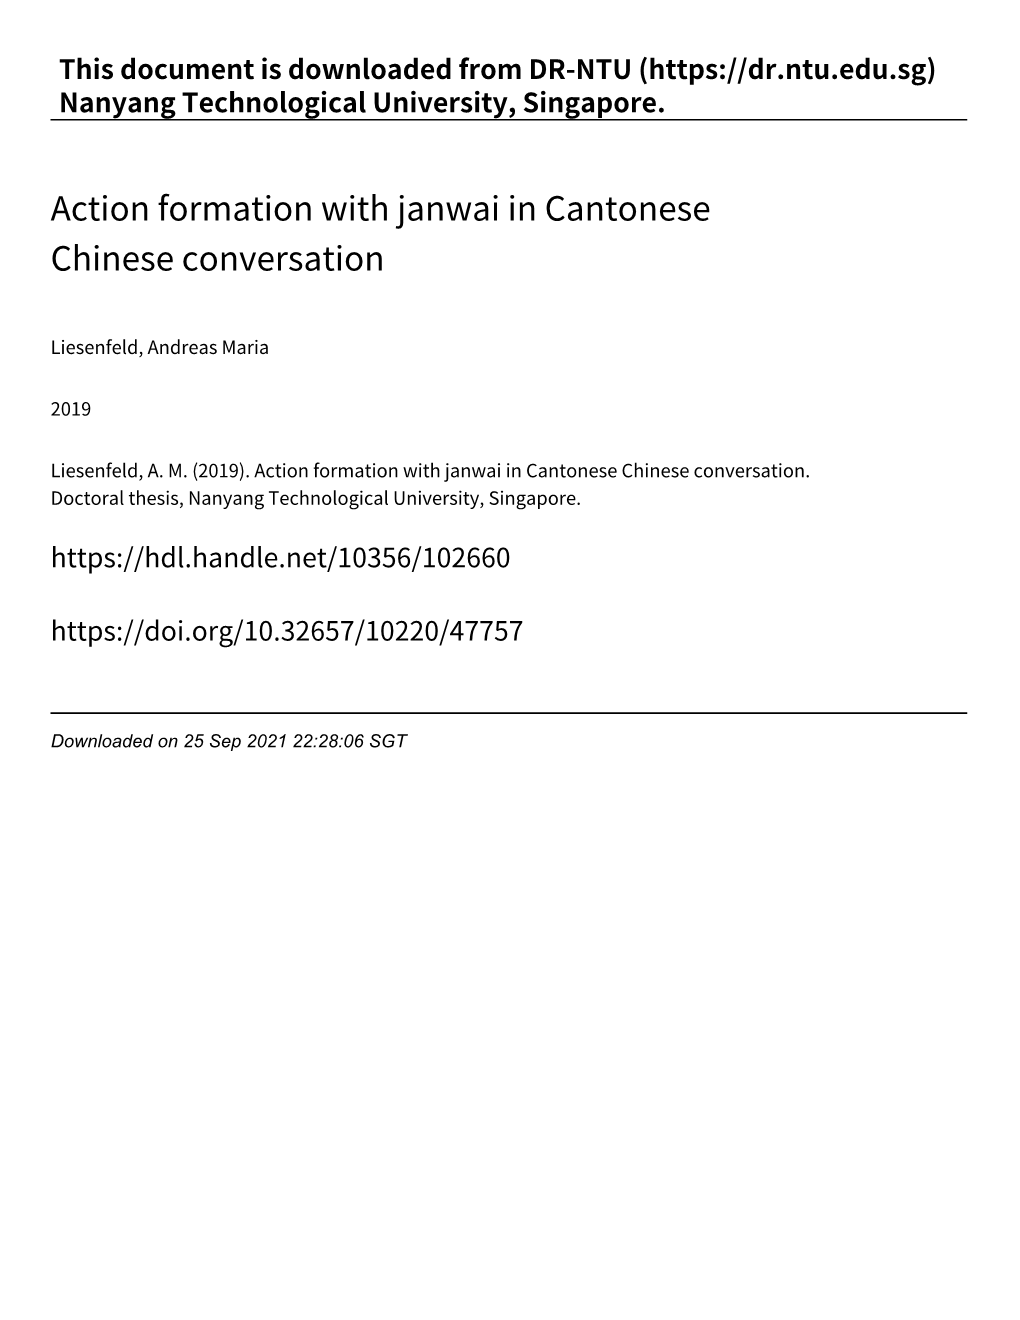 Action Formation with Janwai in Cantonese Chinese Conversation